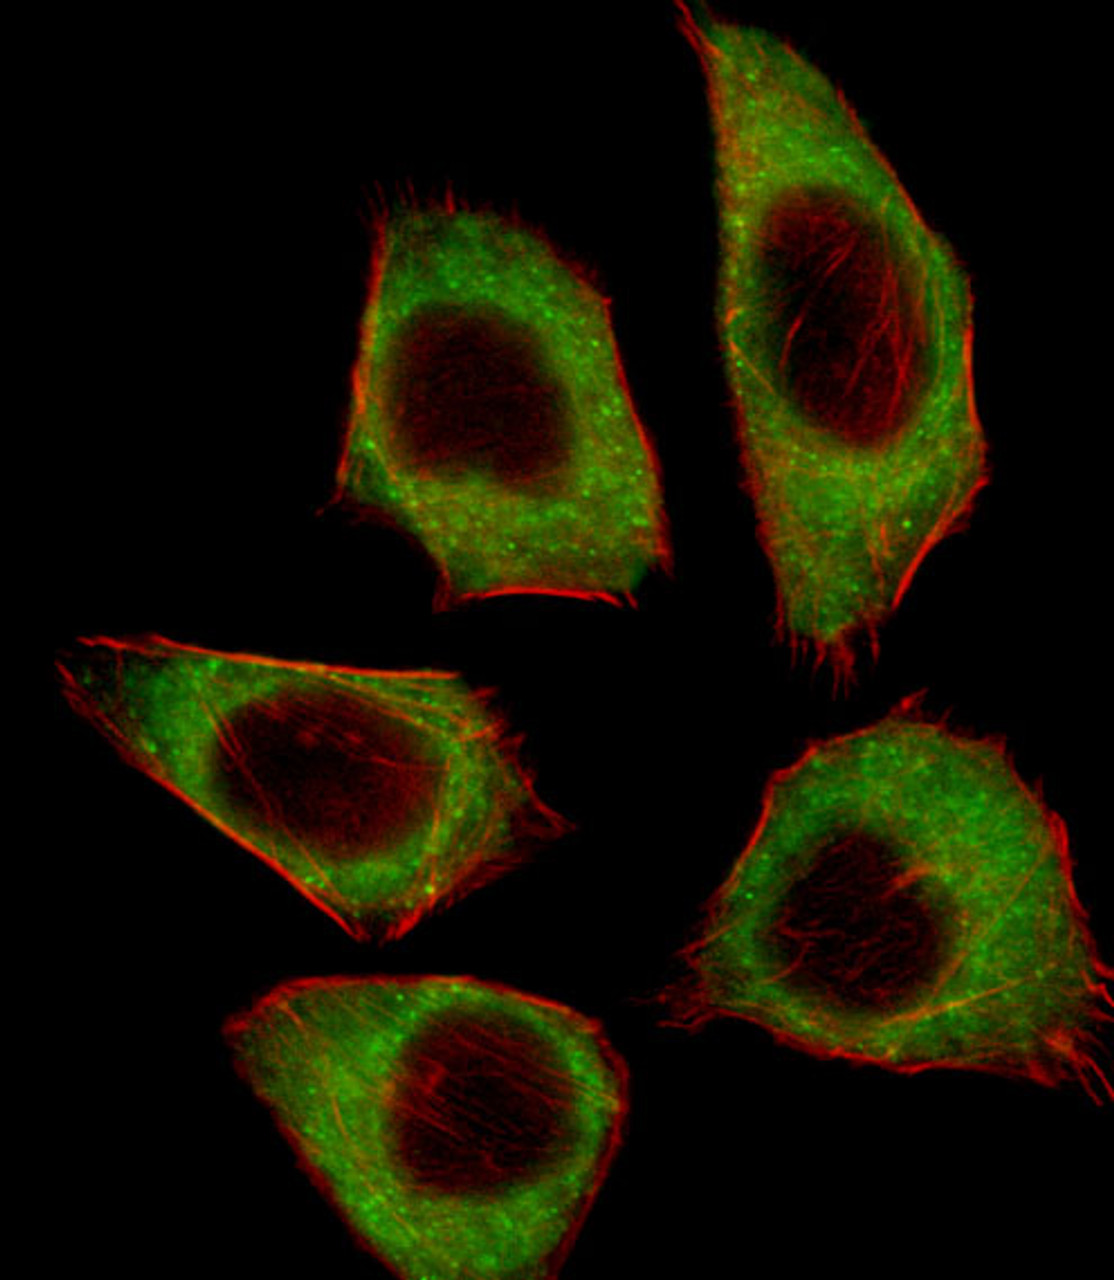 Fluorescent image of A549 cell stained with CSRNP2 Antibody .A549 cells were fixed with 4% PFA (20 min) , permeabilized with Triton X-100 (0.1%, 10 min) , then incubated with CSRNP2 primary antibody (1:25) . For secondary antibody, Alexa Fluor 488 conjugated donkey anti-rabbit antibody (green) was used (1:400) .Cytoplasmic actin was counterstained with Alexa Fluor 555 (red) conjugated Phalloidin (7units/ml) .CSRNP2 immunoreactivity is localized to Cytoplasm significantly.